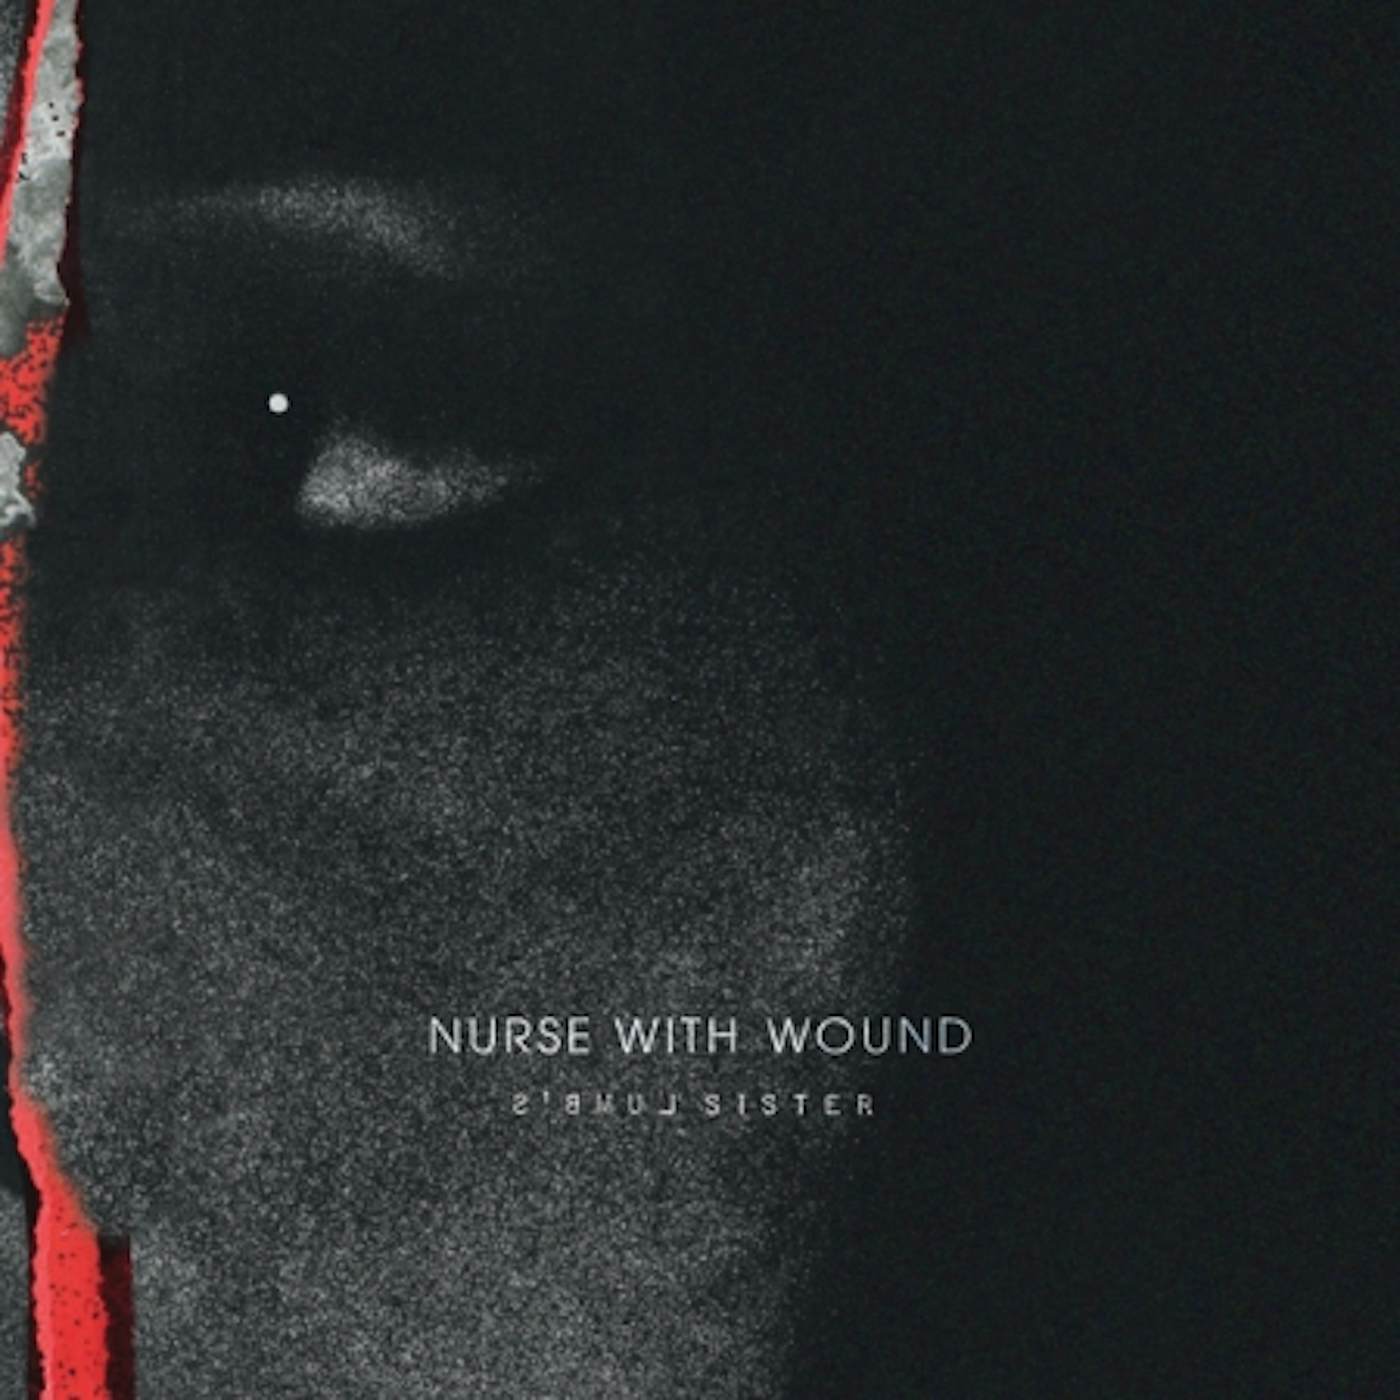 Nurse With Wound LUMBS SISTER CD